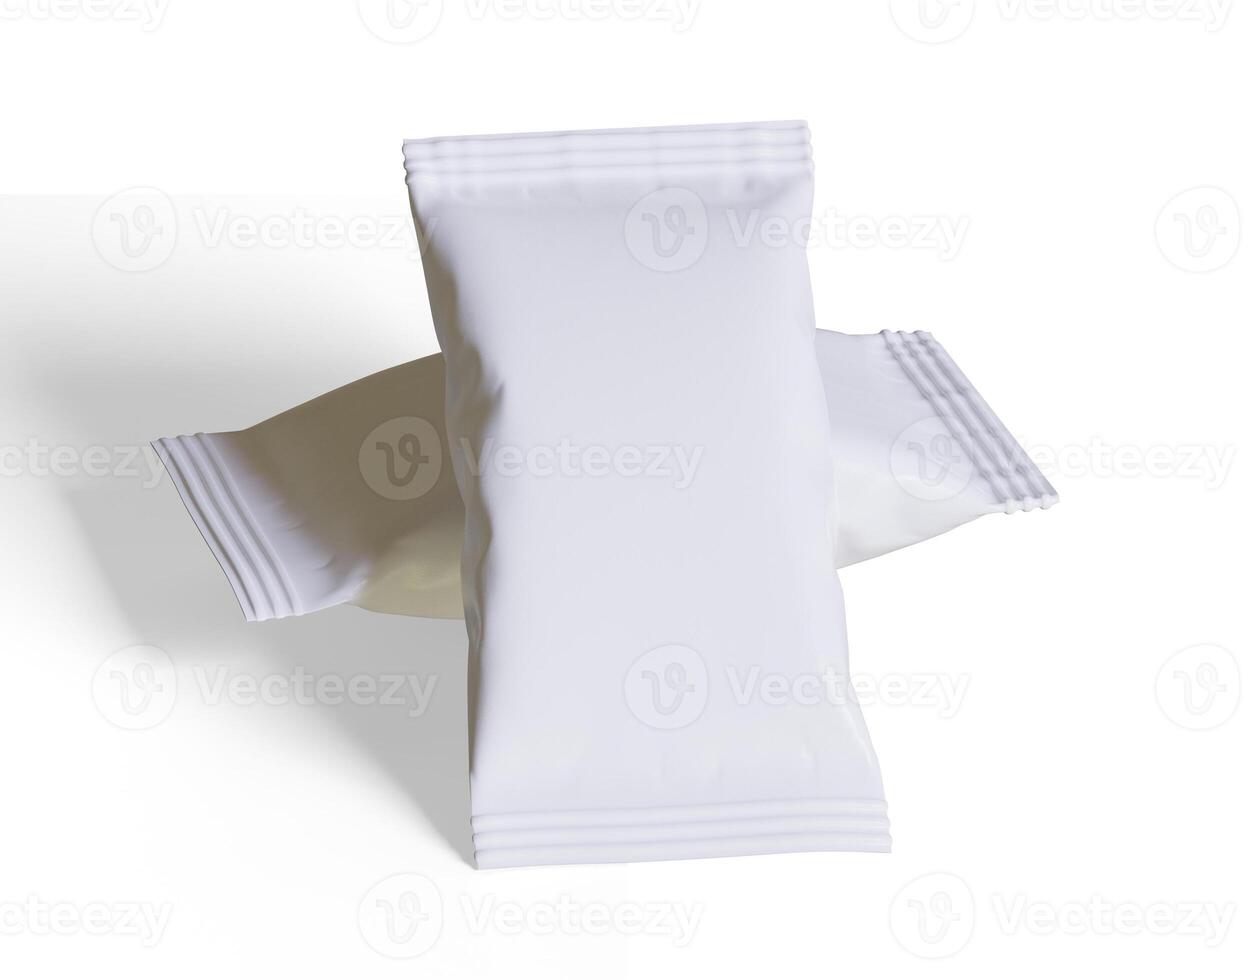 Packaging for mockup collection of snack bar 3D rendering illustration isolated on white background. It can be used in the adv, promo, package and etc photo